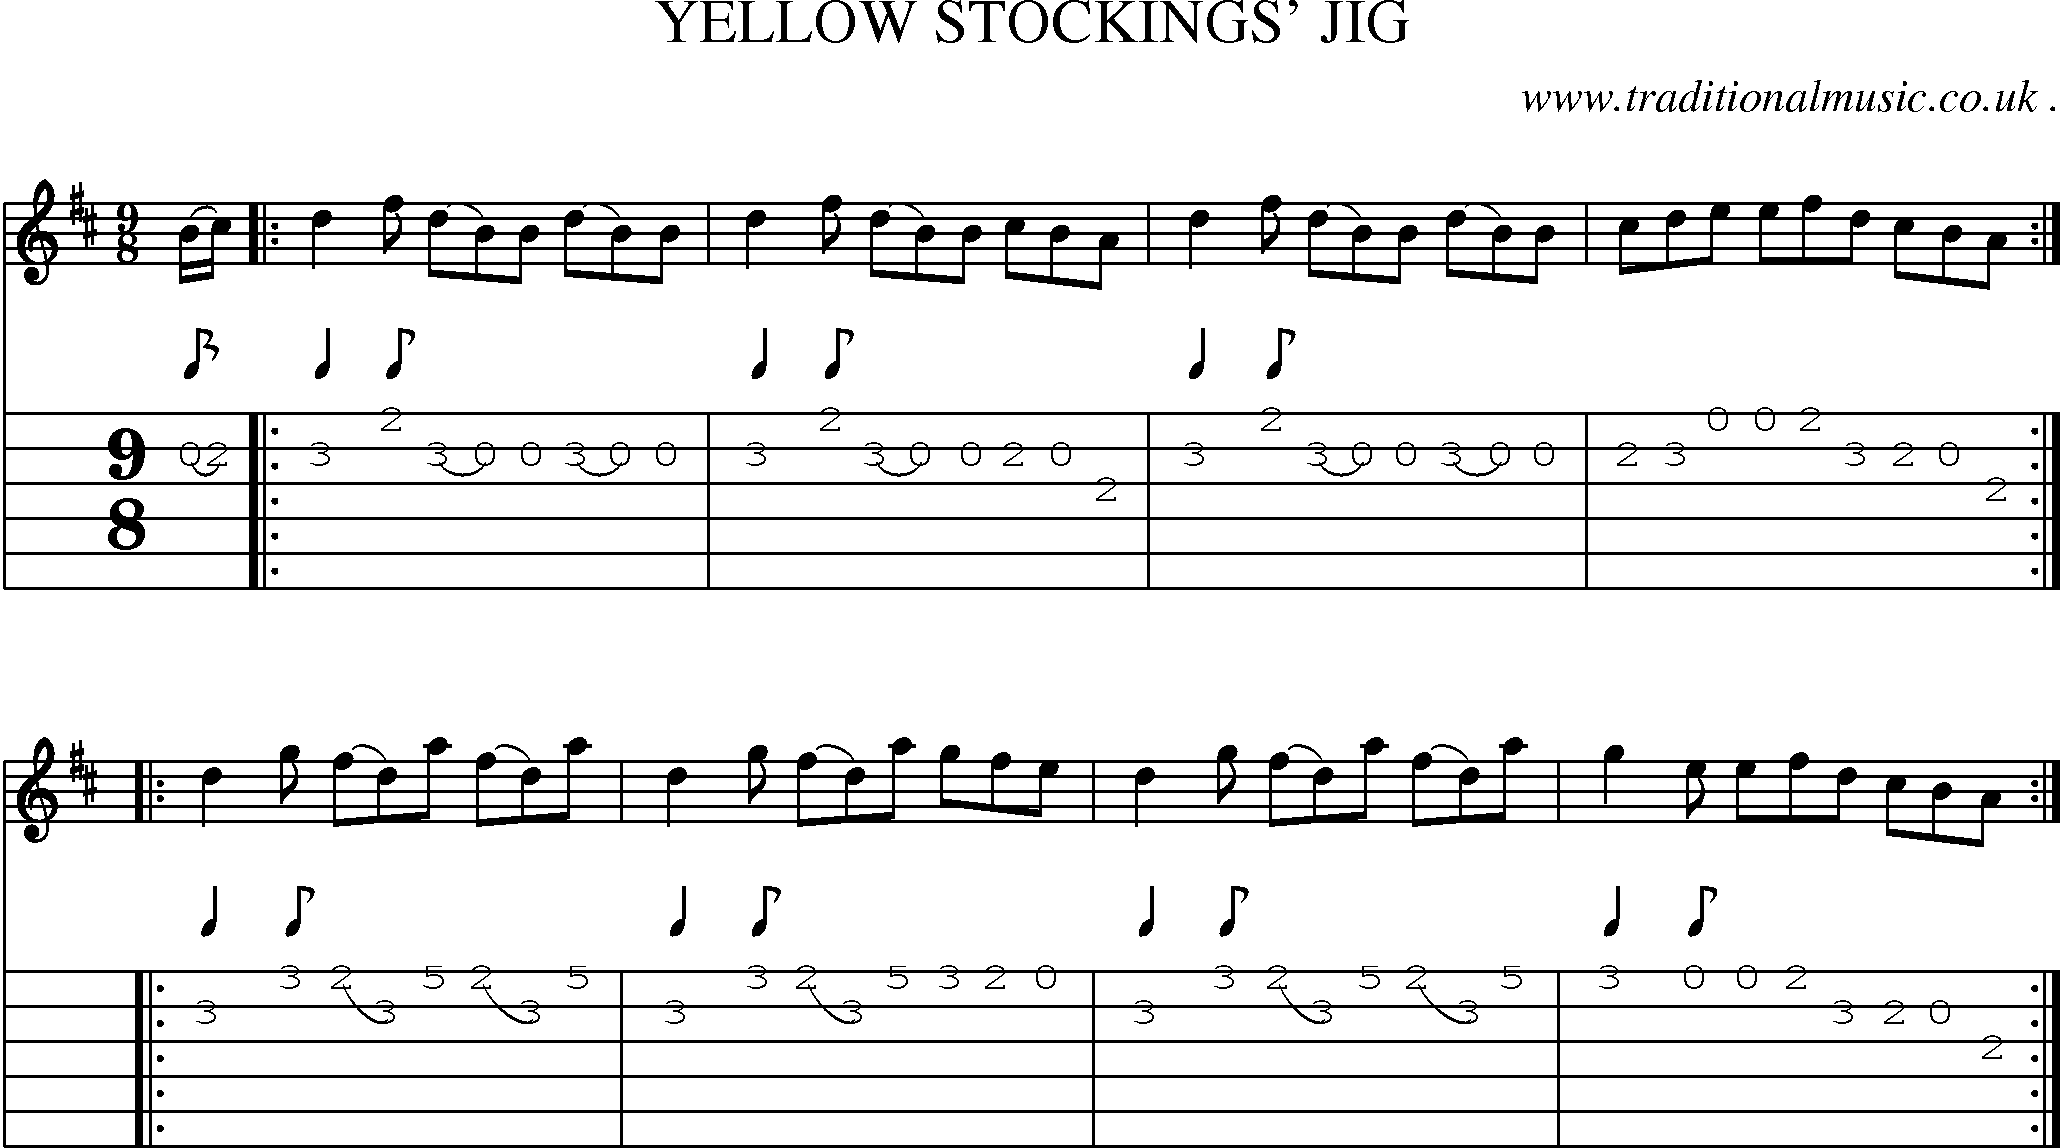 Sheet-Music and Guitar Tabs for Yellow Stockings Jig